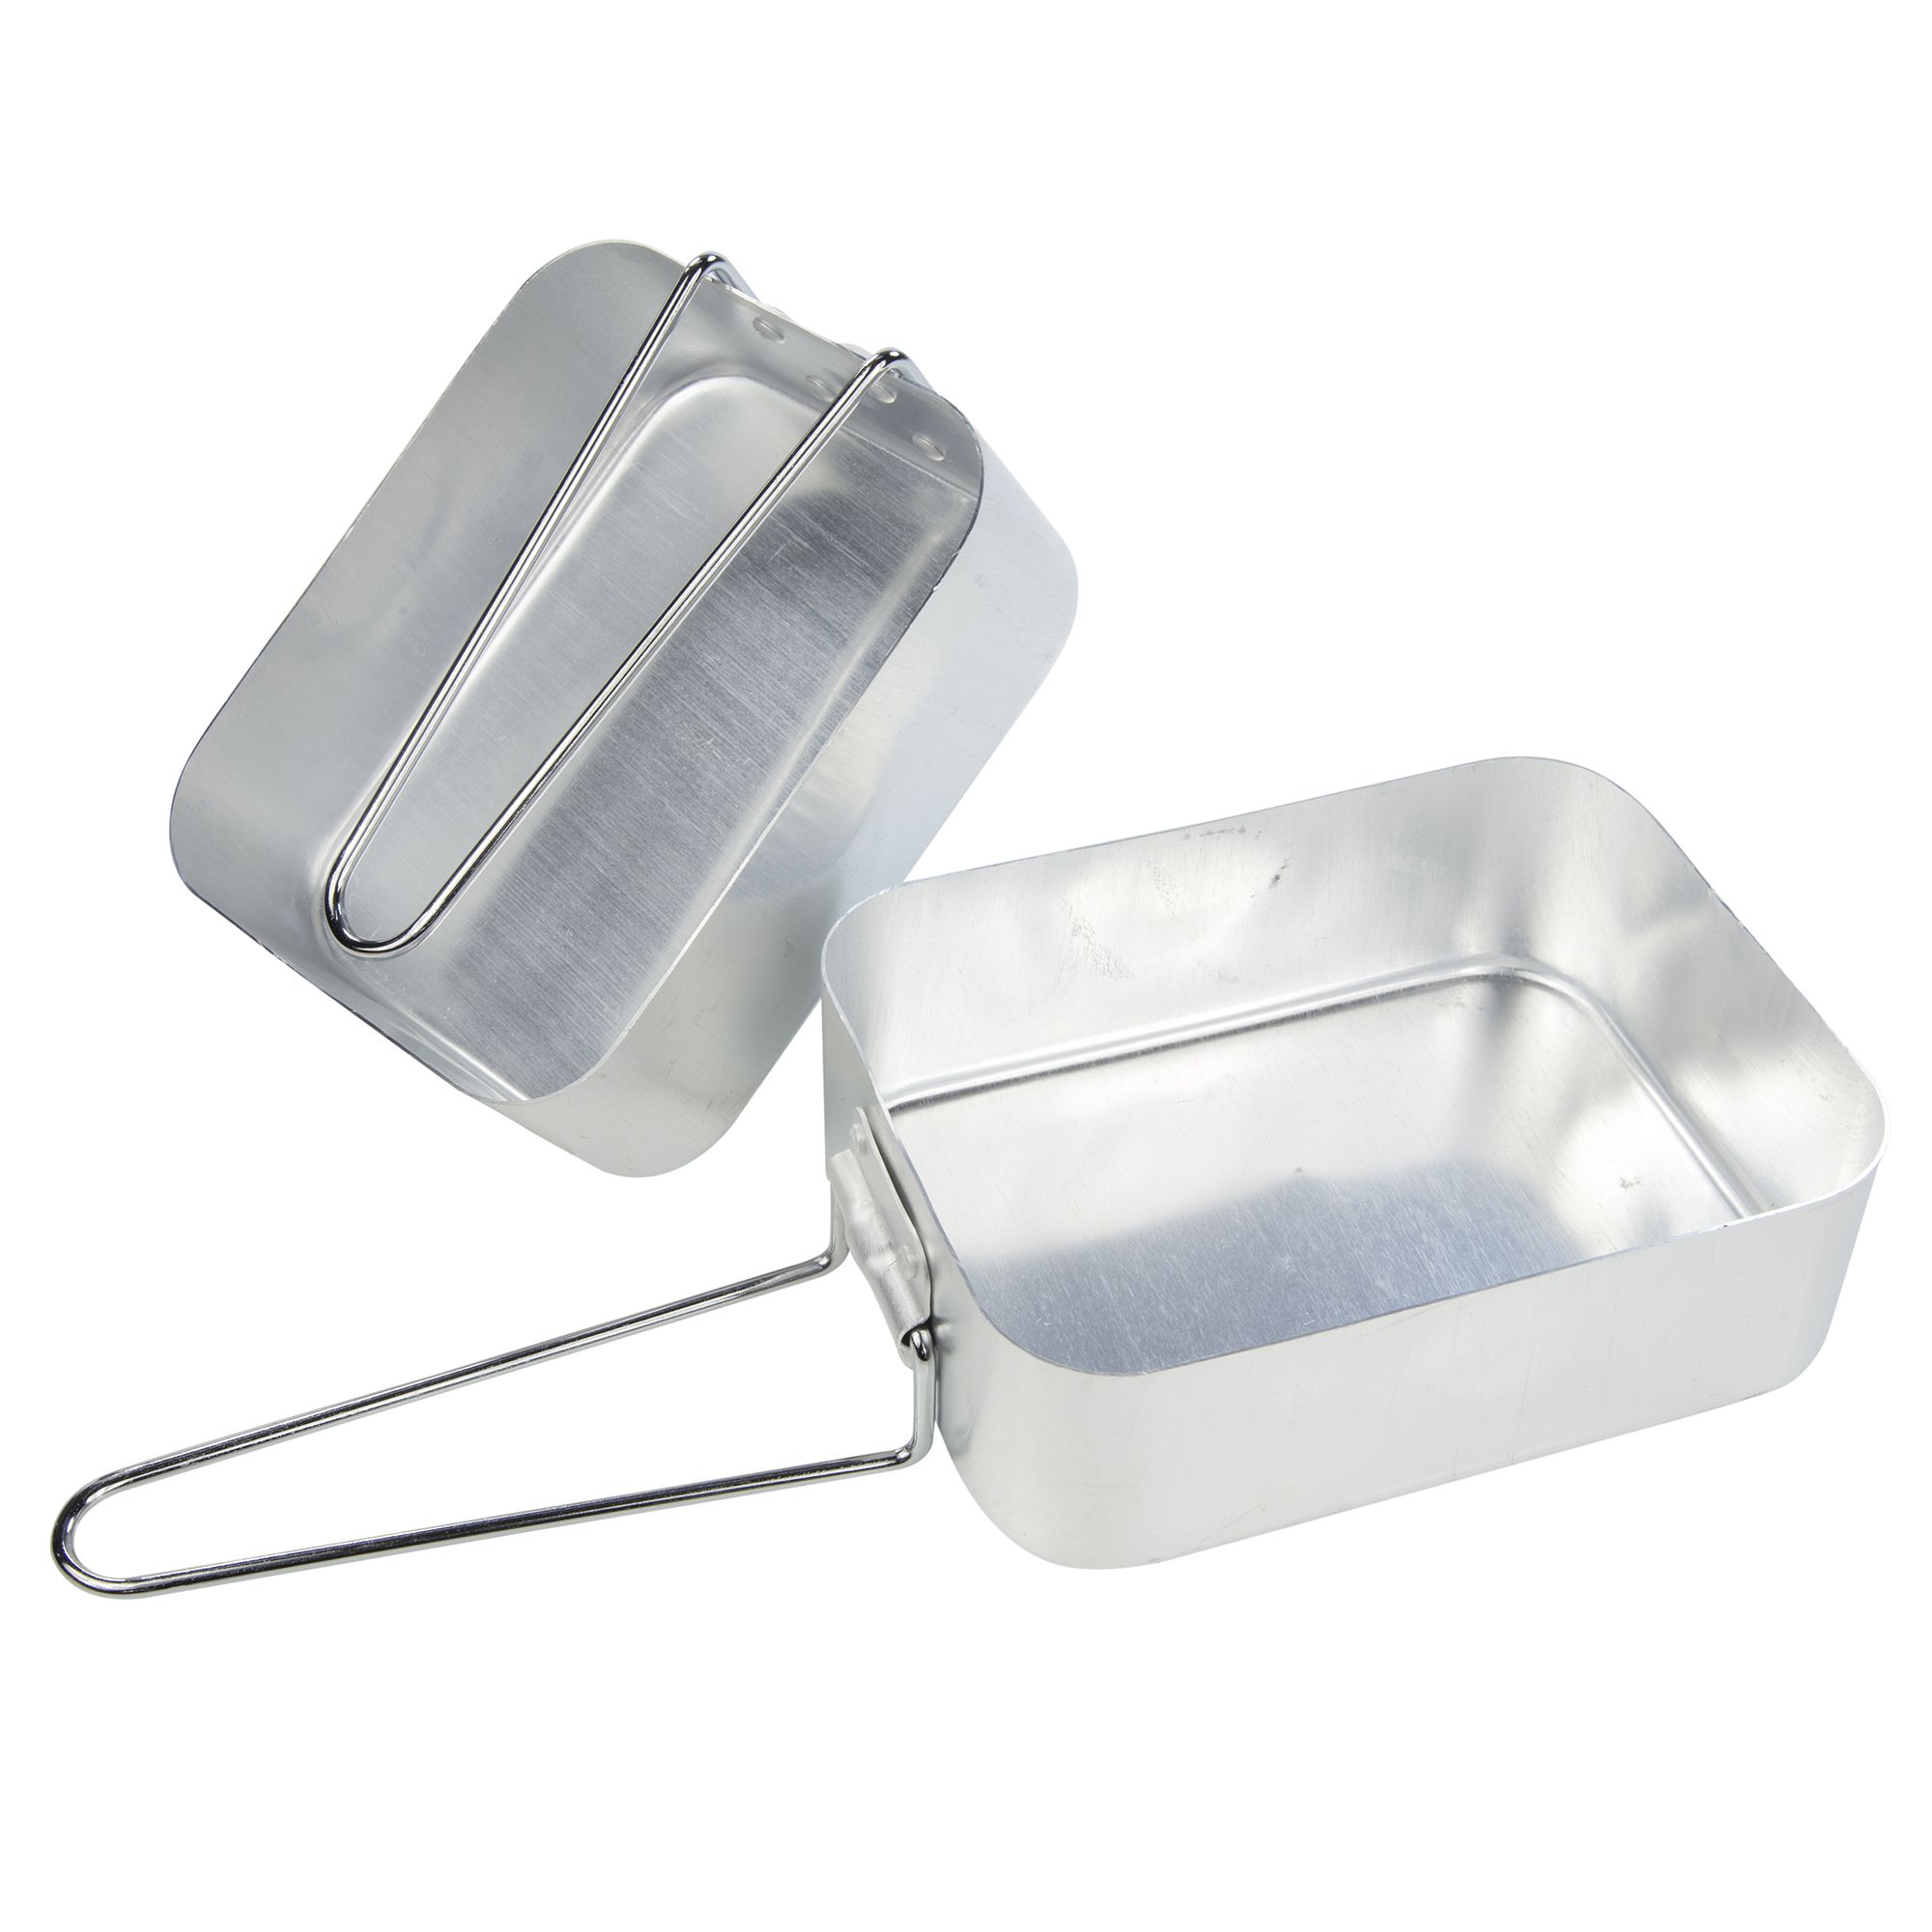 Camping Pots and pans